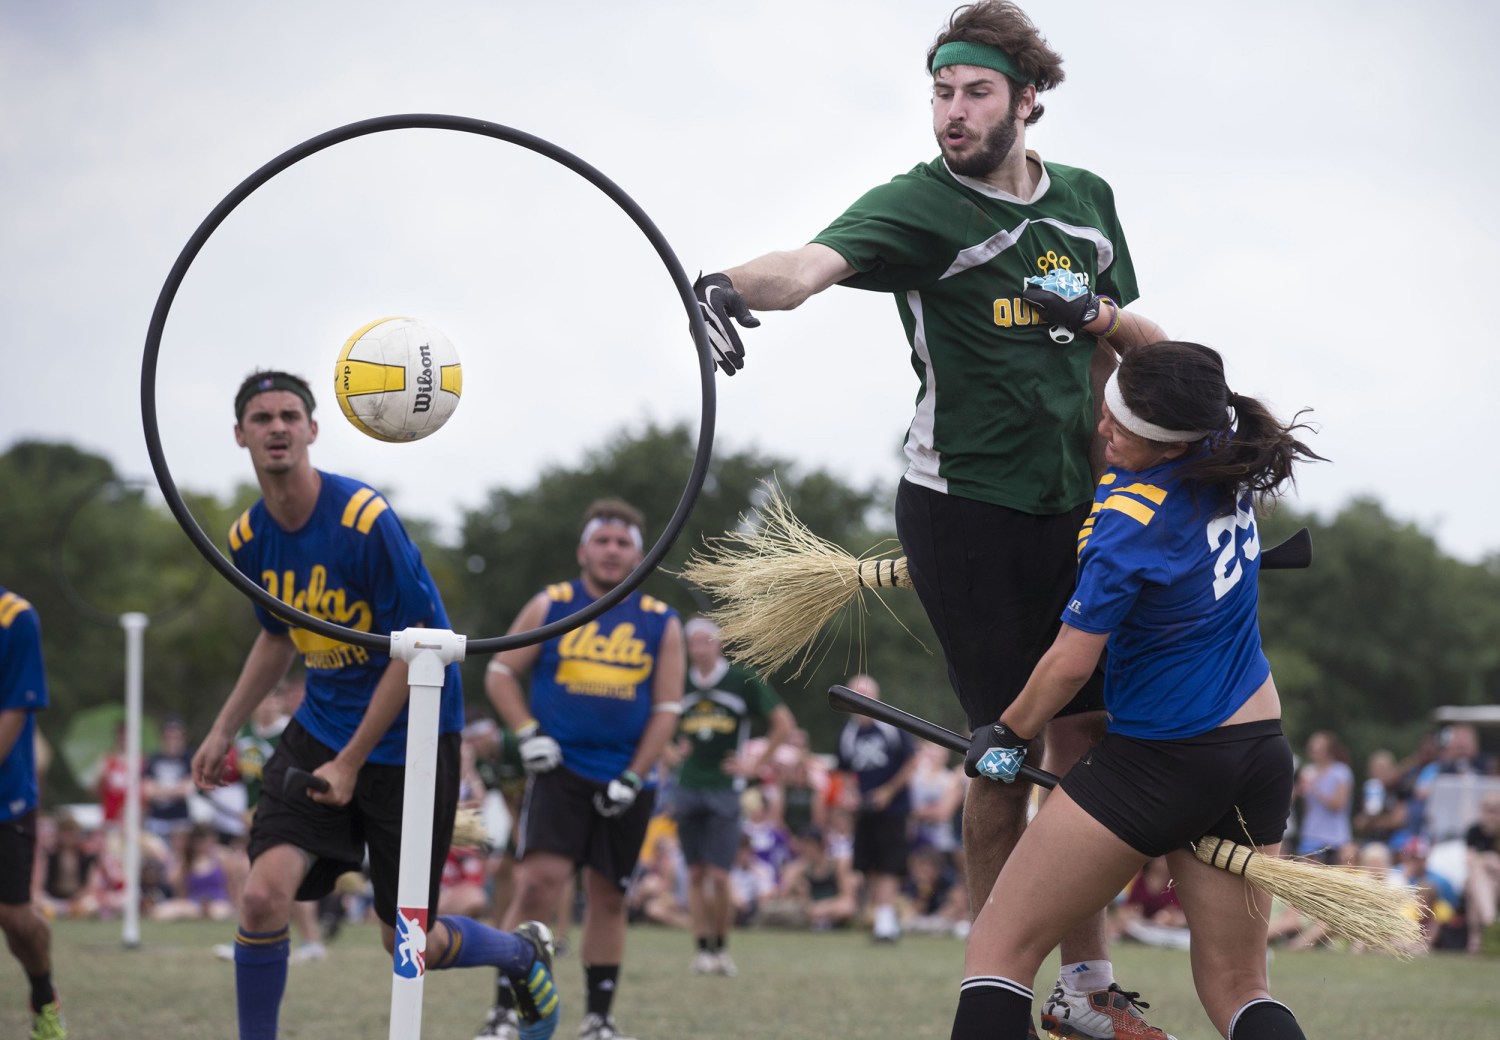 Susceptibles a Lavar ventanas Caliza Quidditch to change name, citing J.K. Rowling's 'anti-trans positions'